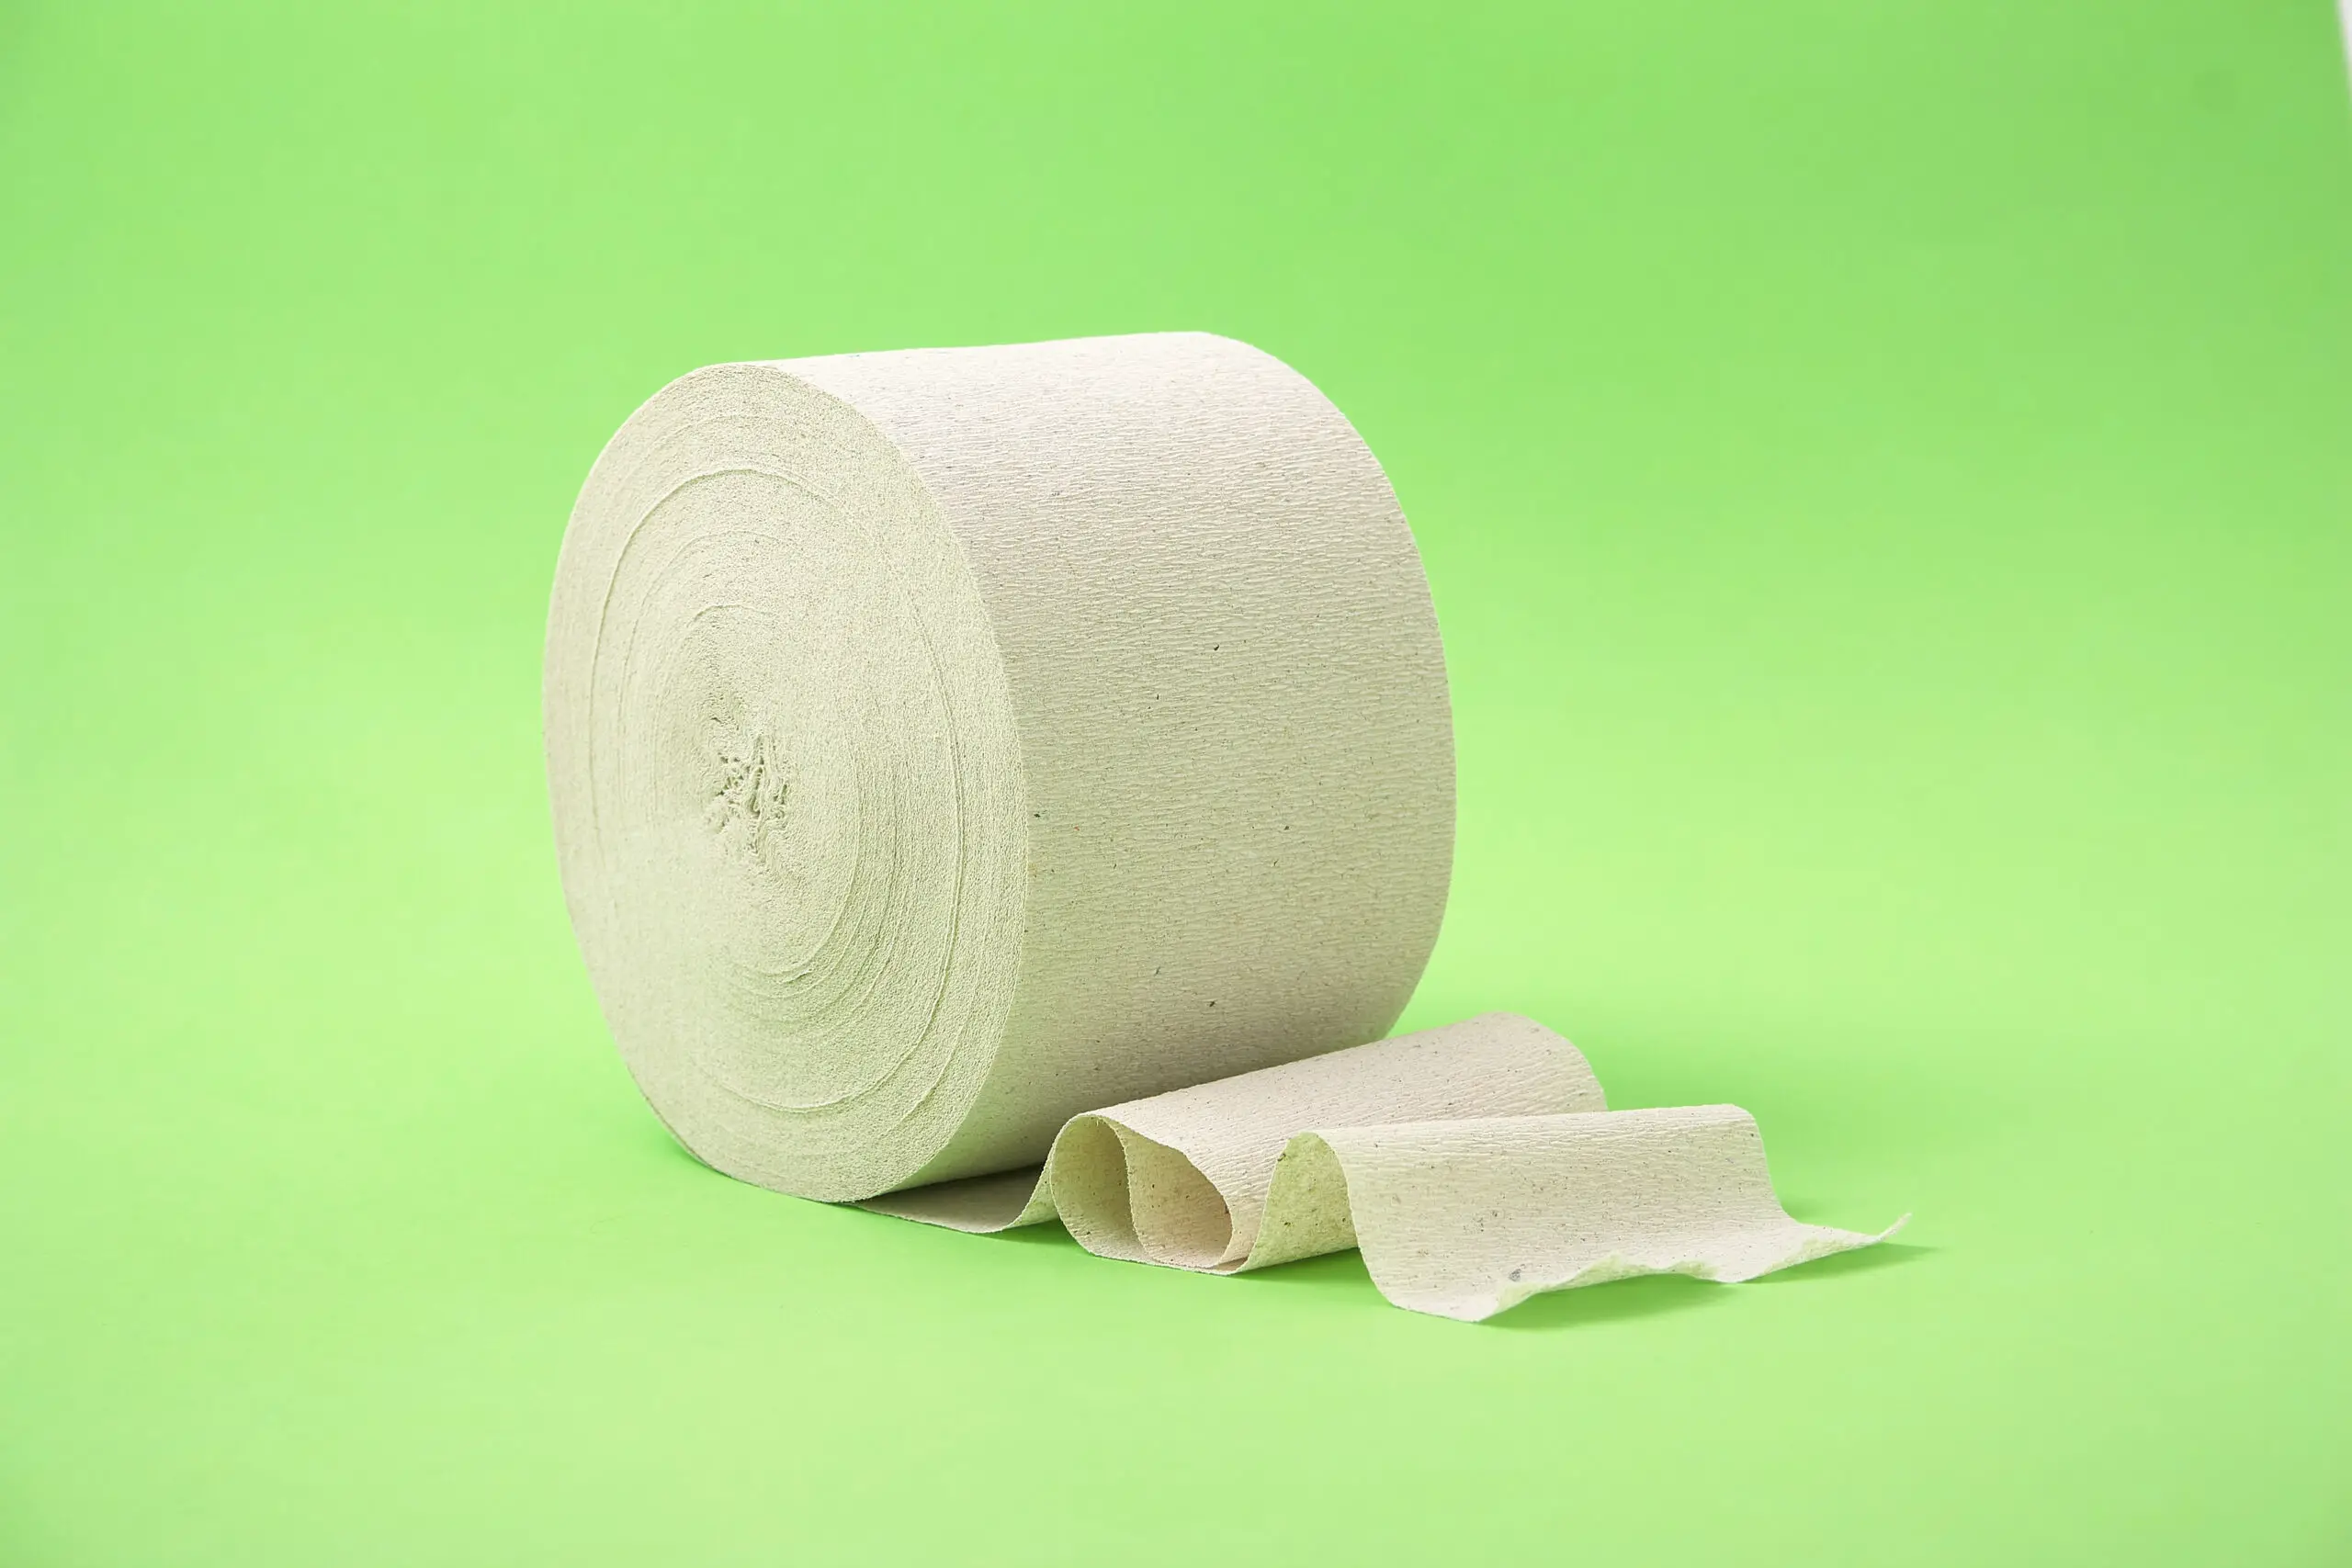 Roll of toilet paper on a green background